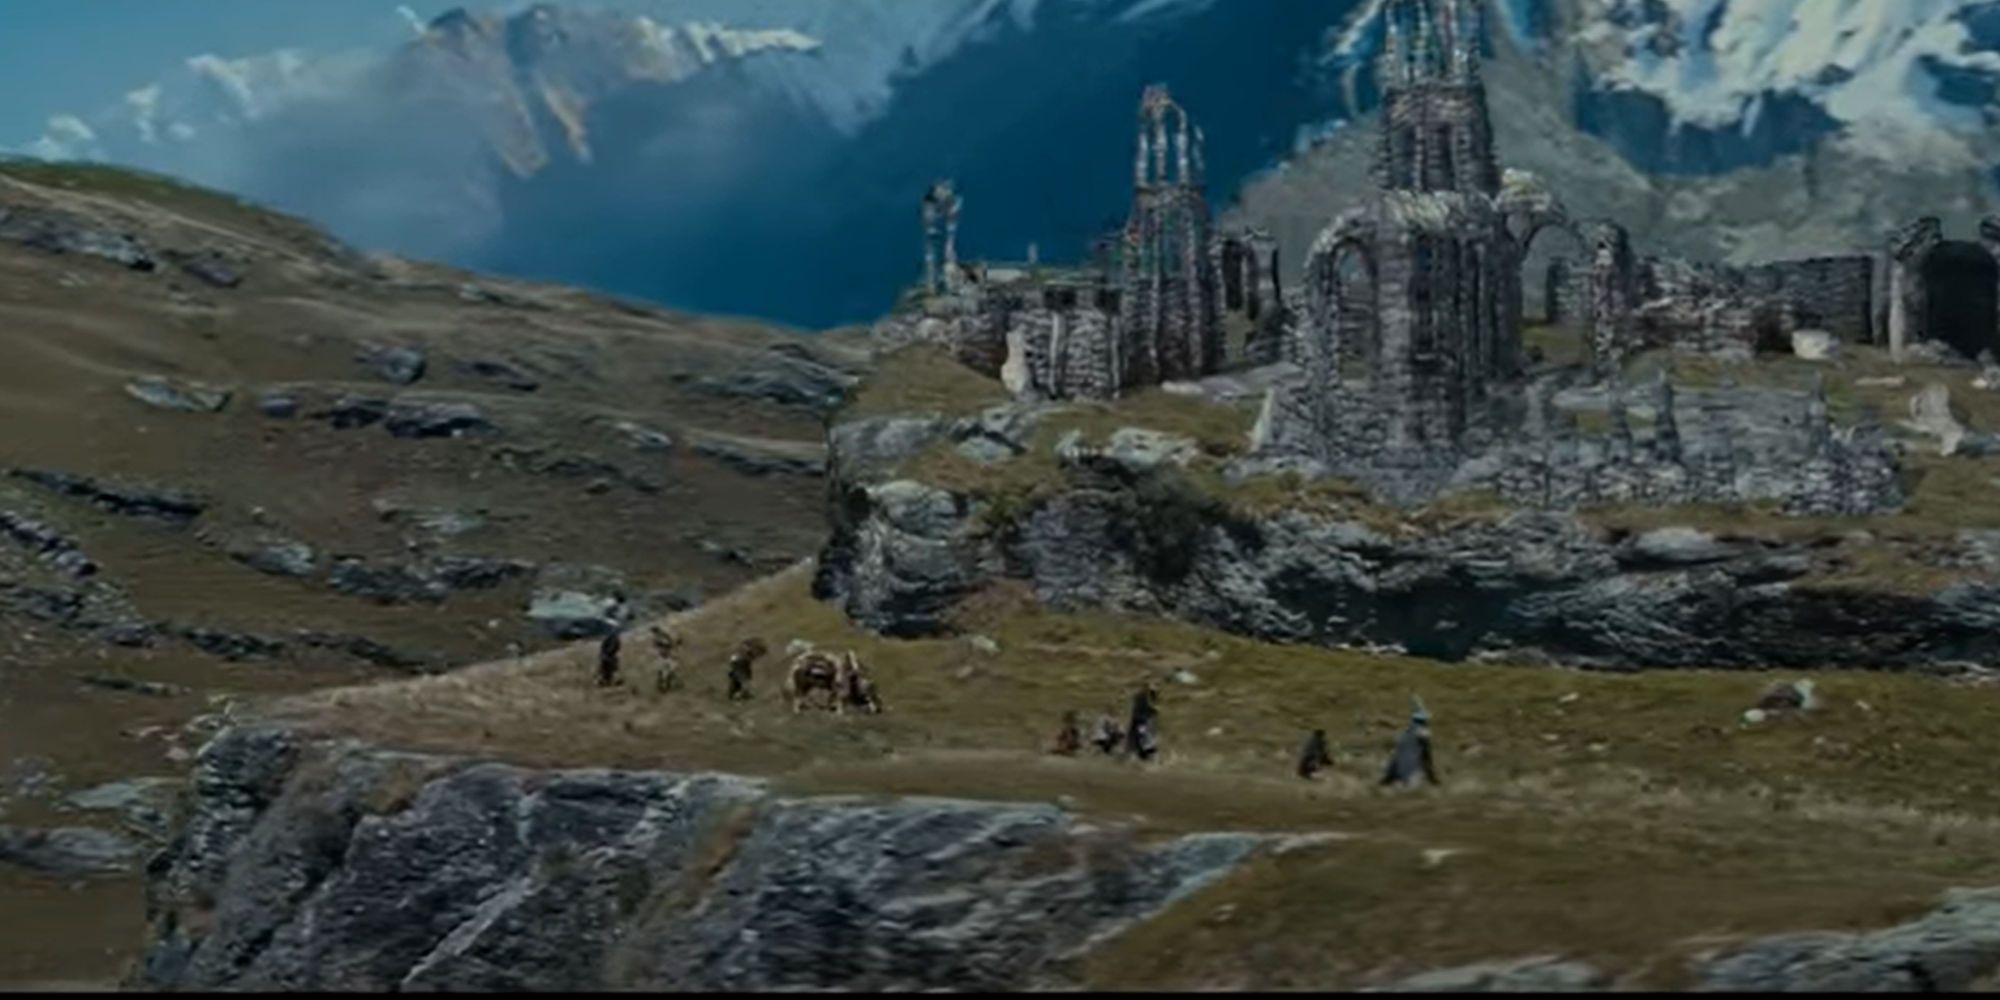 The Fellowship of the Ring walking past some ruins in a line